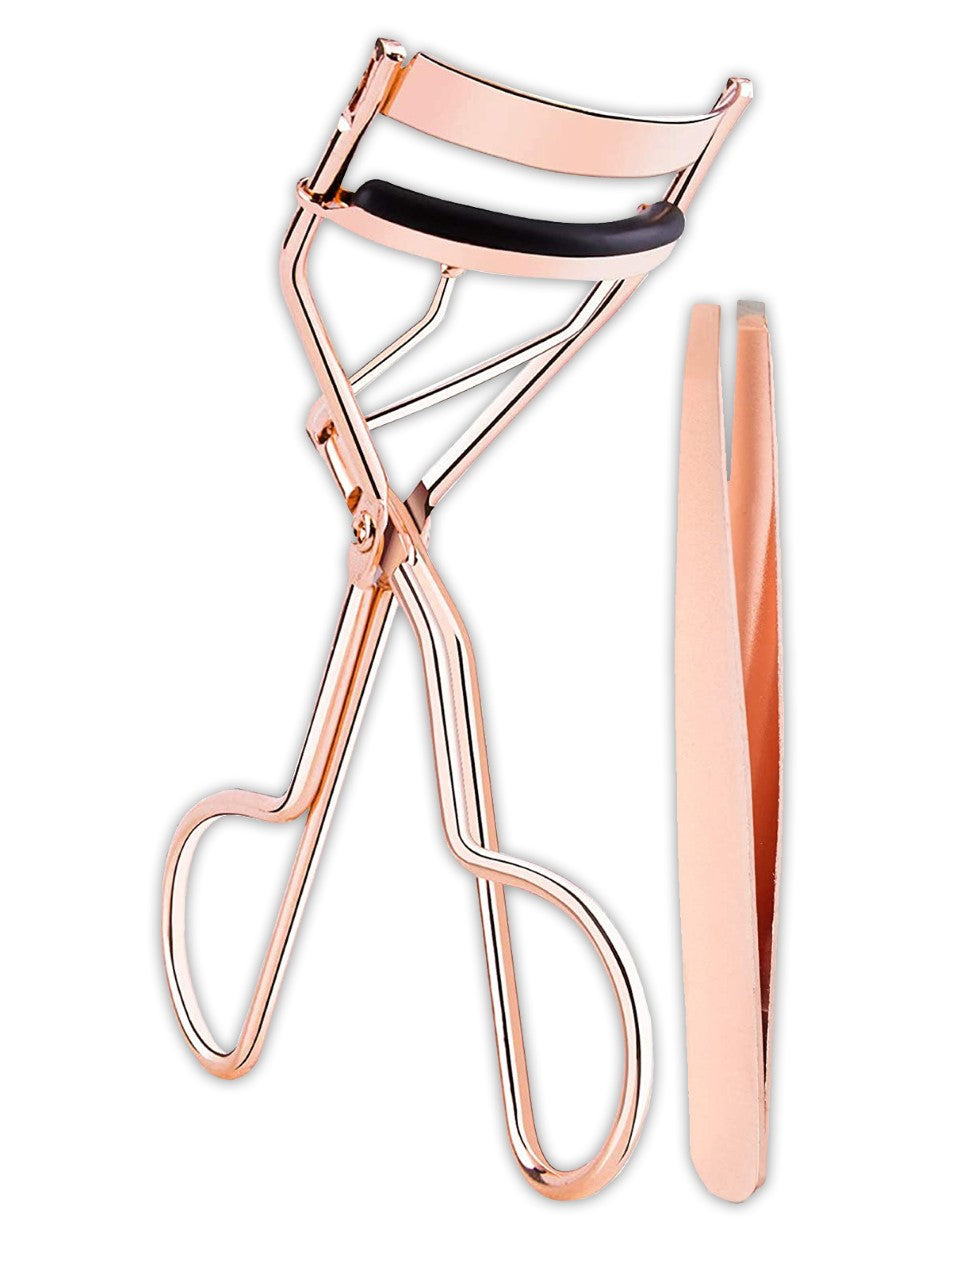 Eyelash curler with advanced silicone pressure + Antistatic lashes applicator KIT of 2